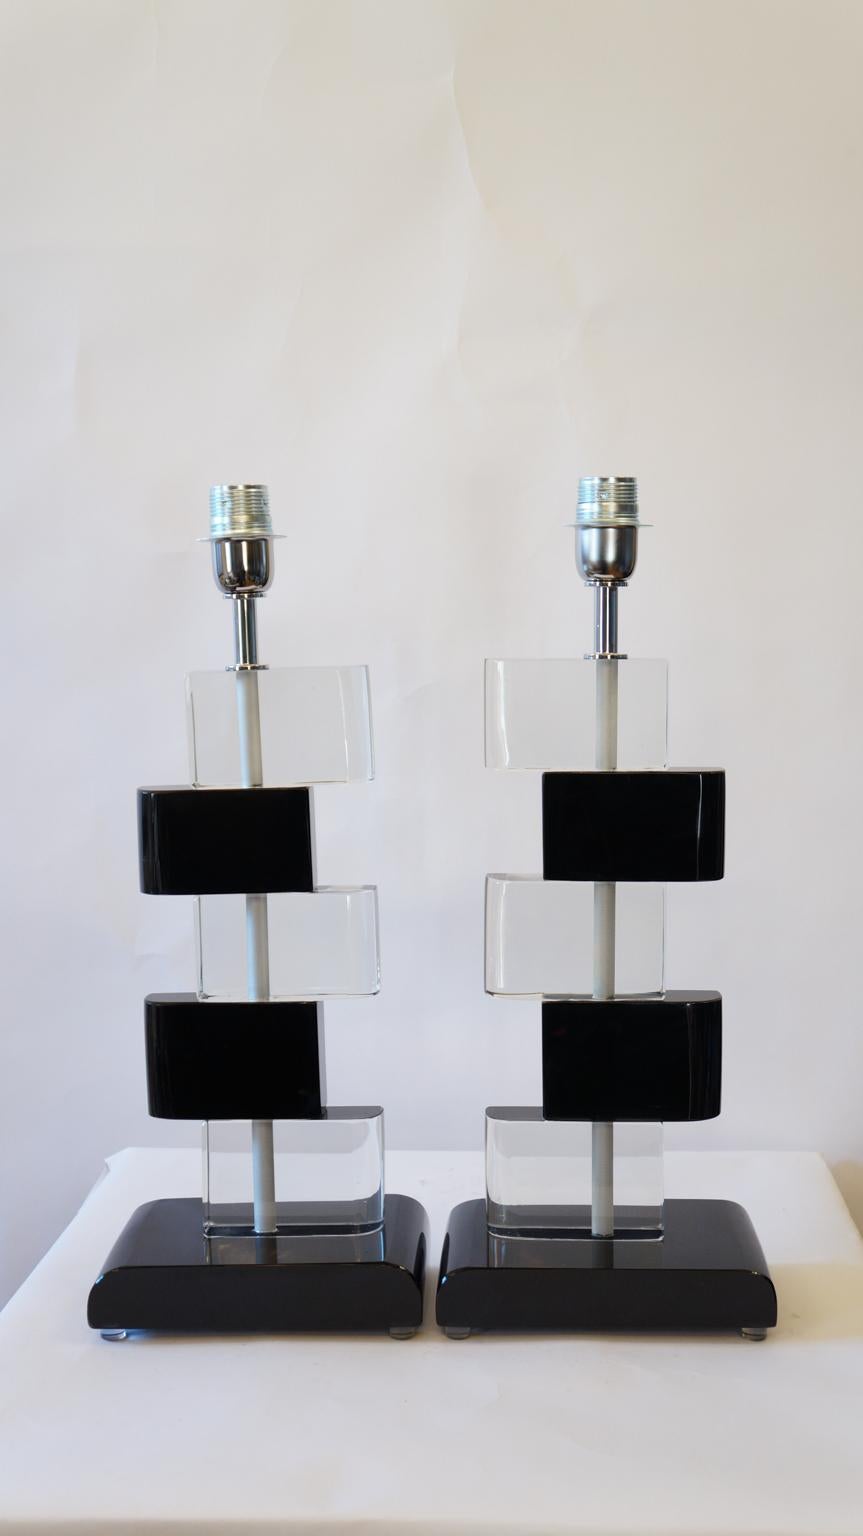 Two Murano glass table lamps by Alberto Donà in 1975. 
In it we can see simplicity, elegance, linearity. It is, in fact, a simple model, and it is thanks to its colors that its beauty stands out. 
We note in fact the combination of black and